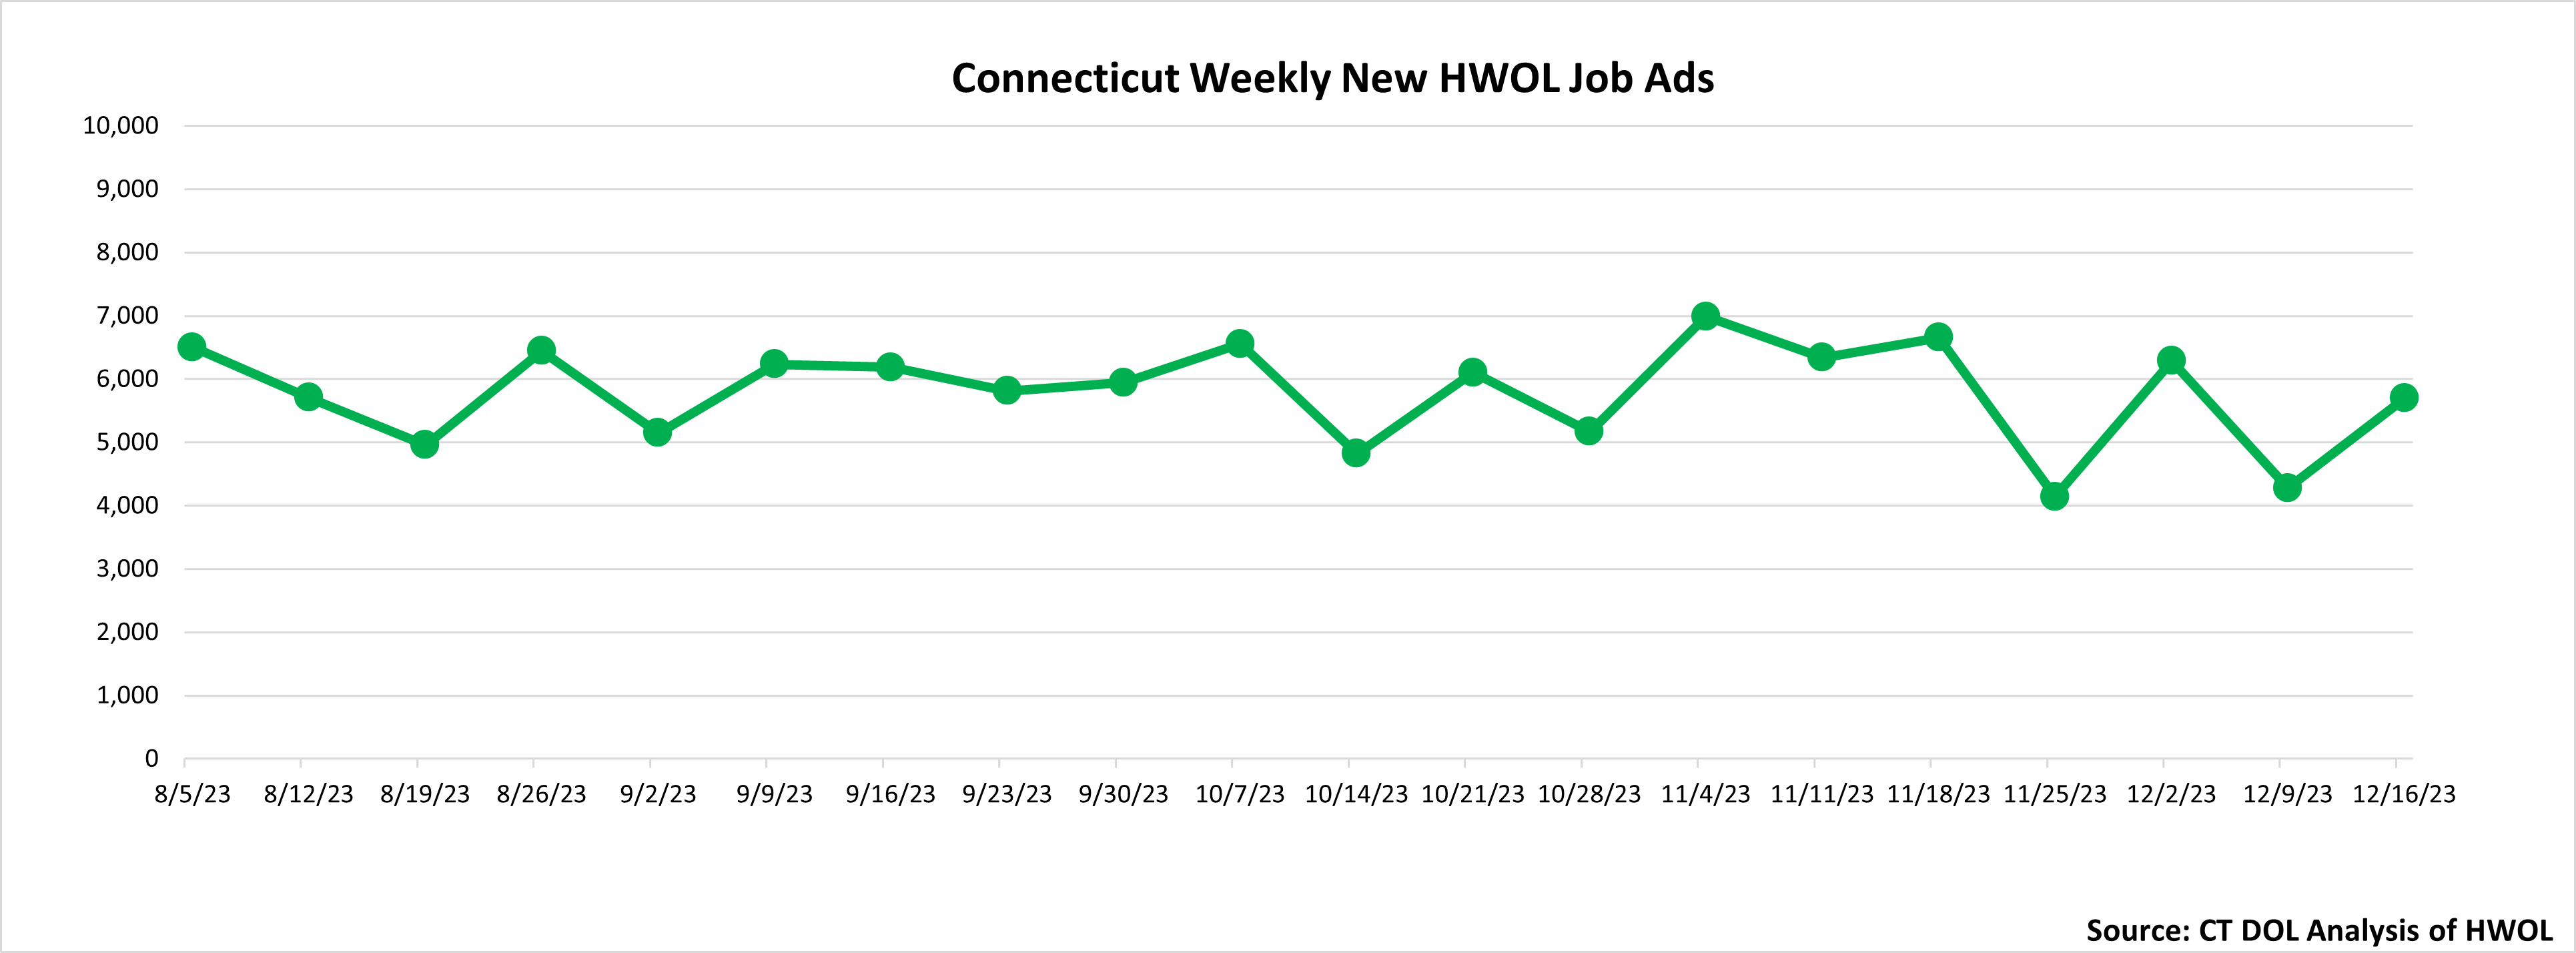 Connecticut Weekly Statewide New HWOL Job Ads through 12/16/23